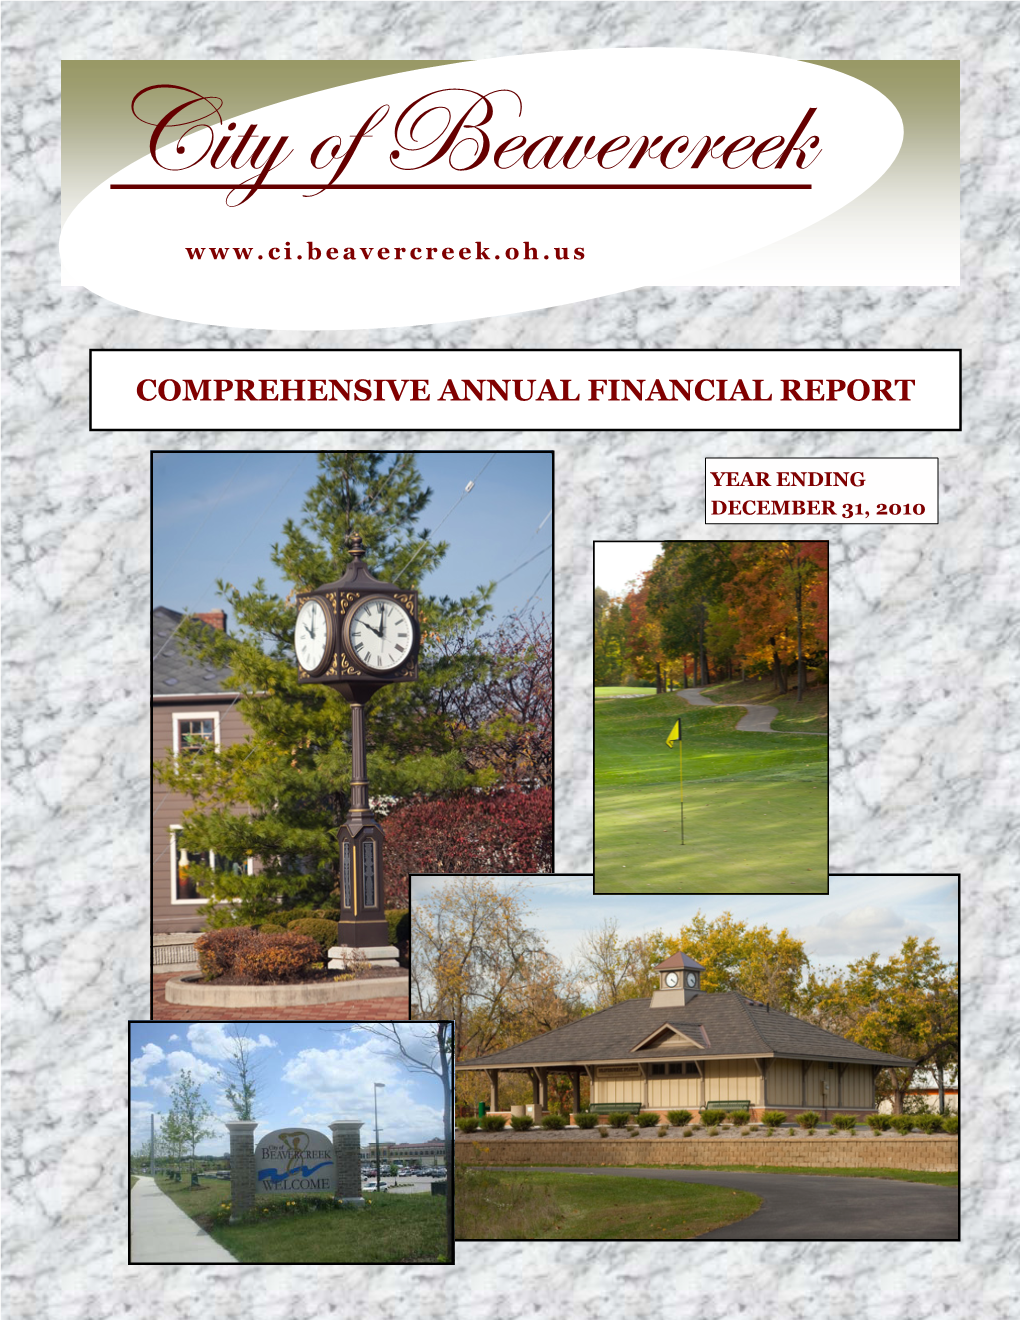 City of Beavercreek, Ohio Comprehensive Annual Financial Report for the Year Ended December 31, 2010